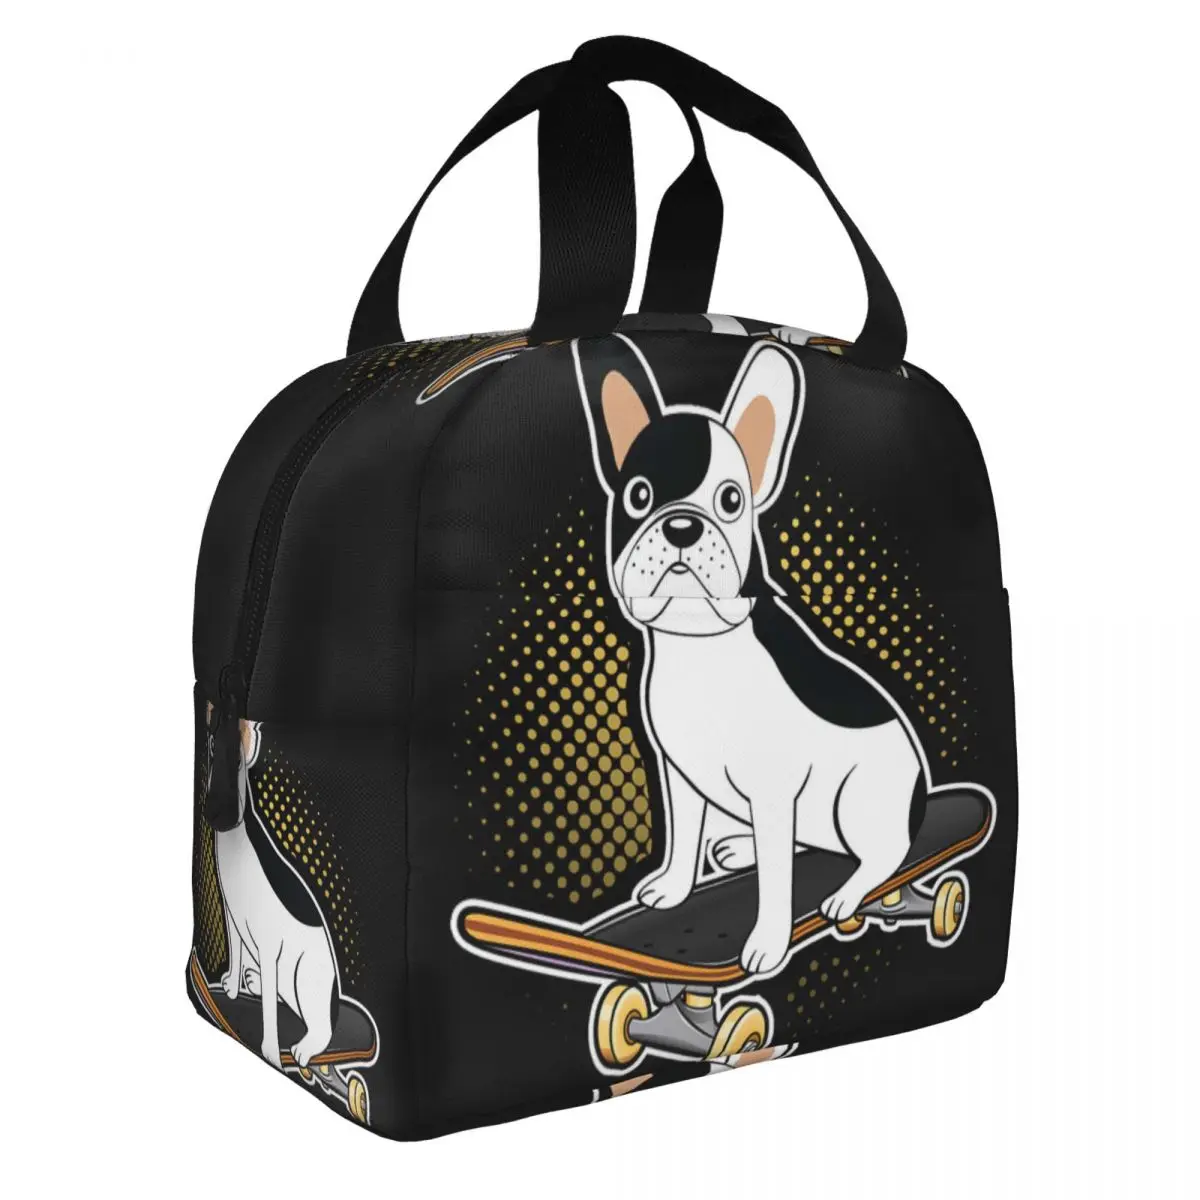 Dog Breed French Bulldog Skateboard Lunch Bento Bags Portable Aluminum Foil thickened Thermal Cloth Lunch Bag for Women Men Boy